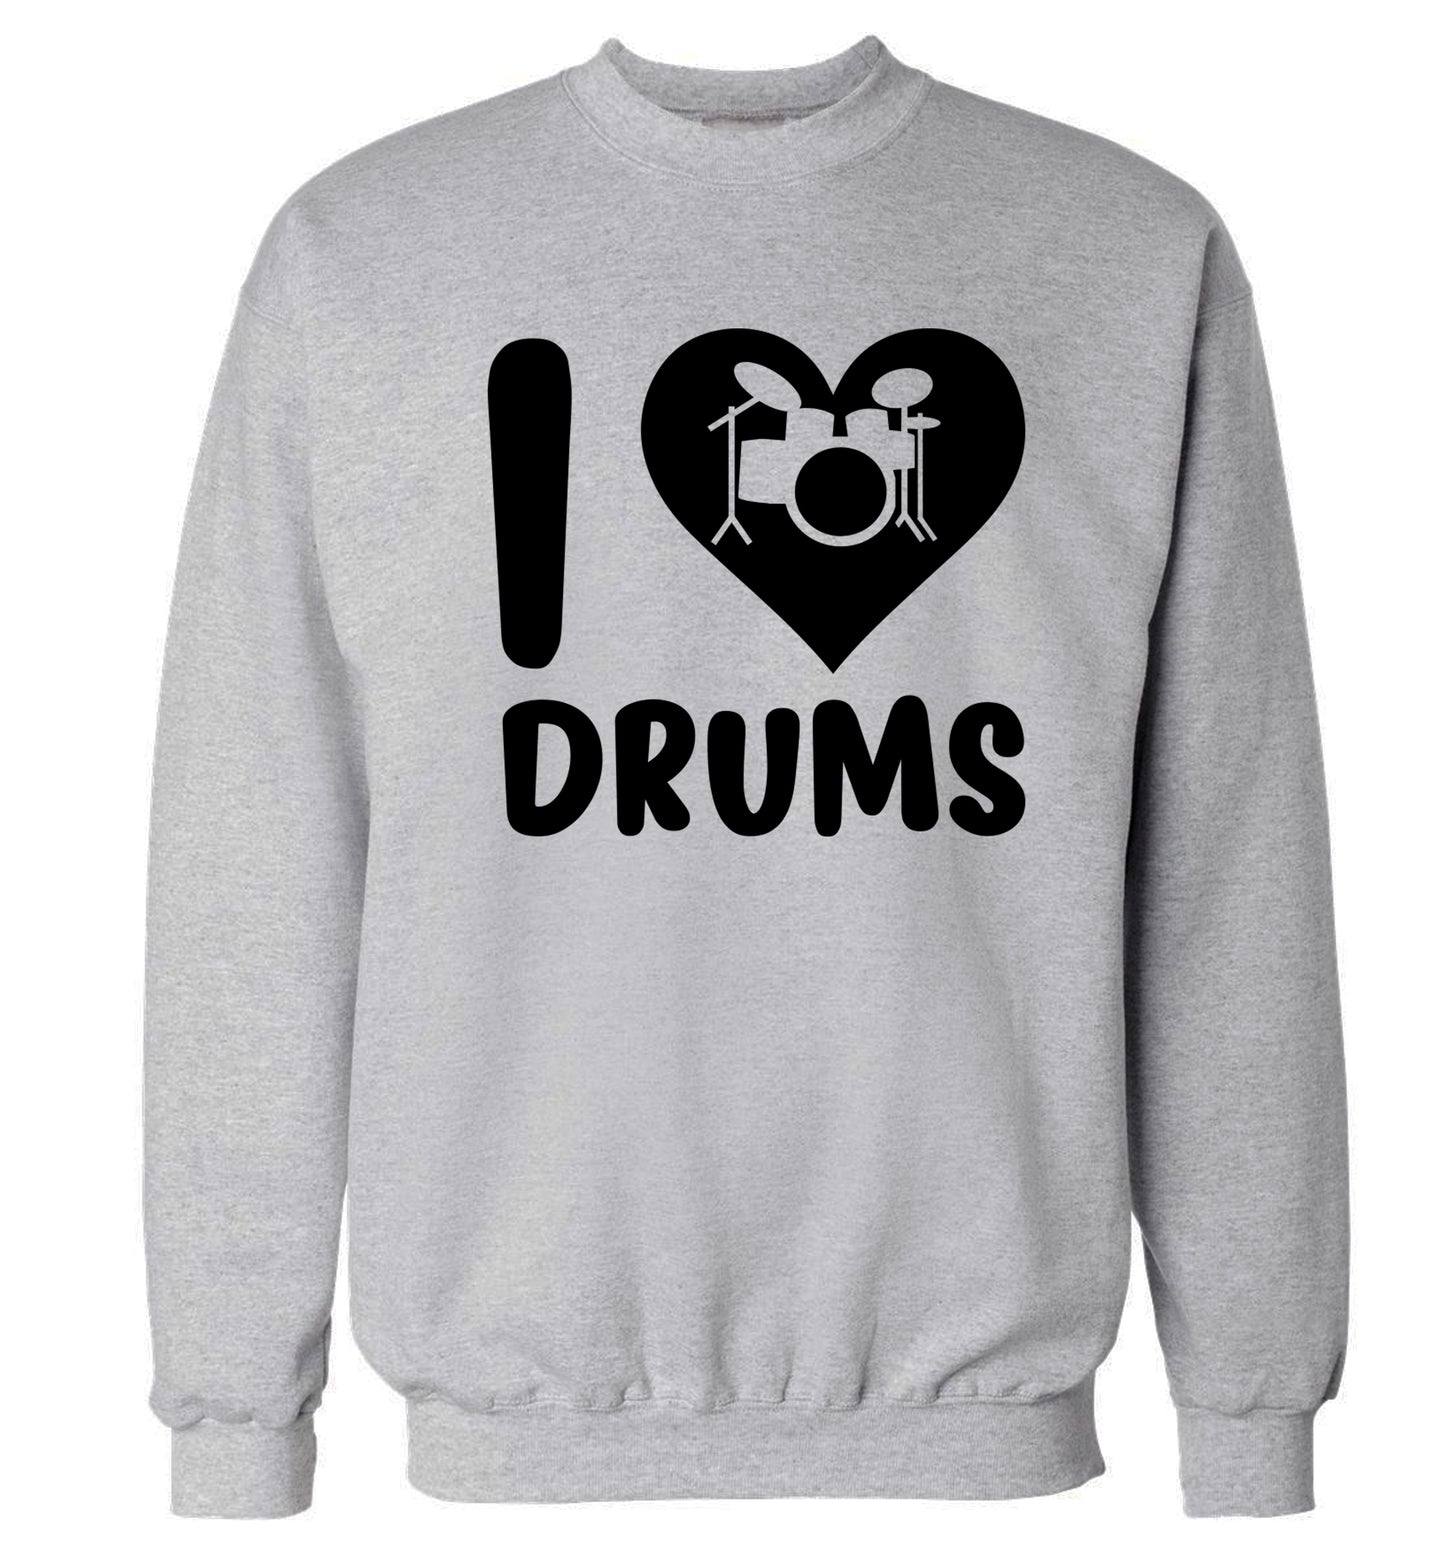 I love drums Adult's unisex grey Sweater 2XL